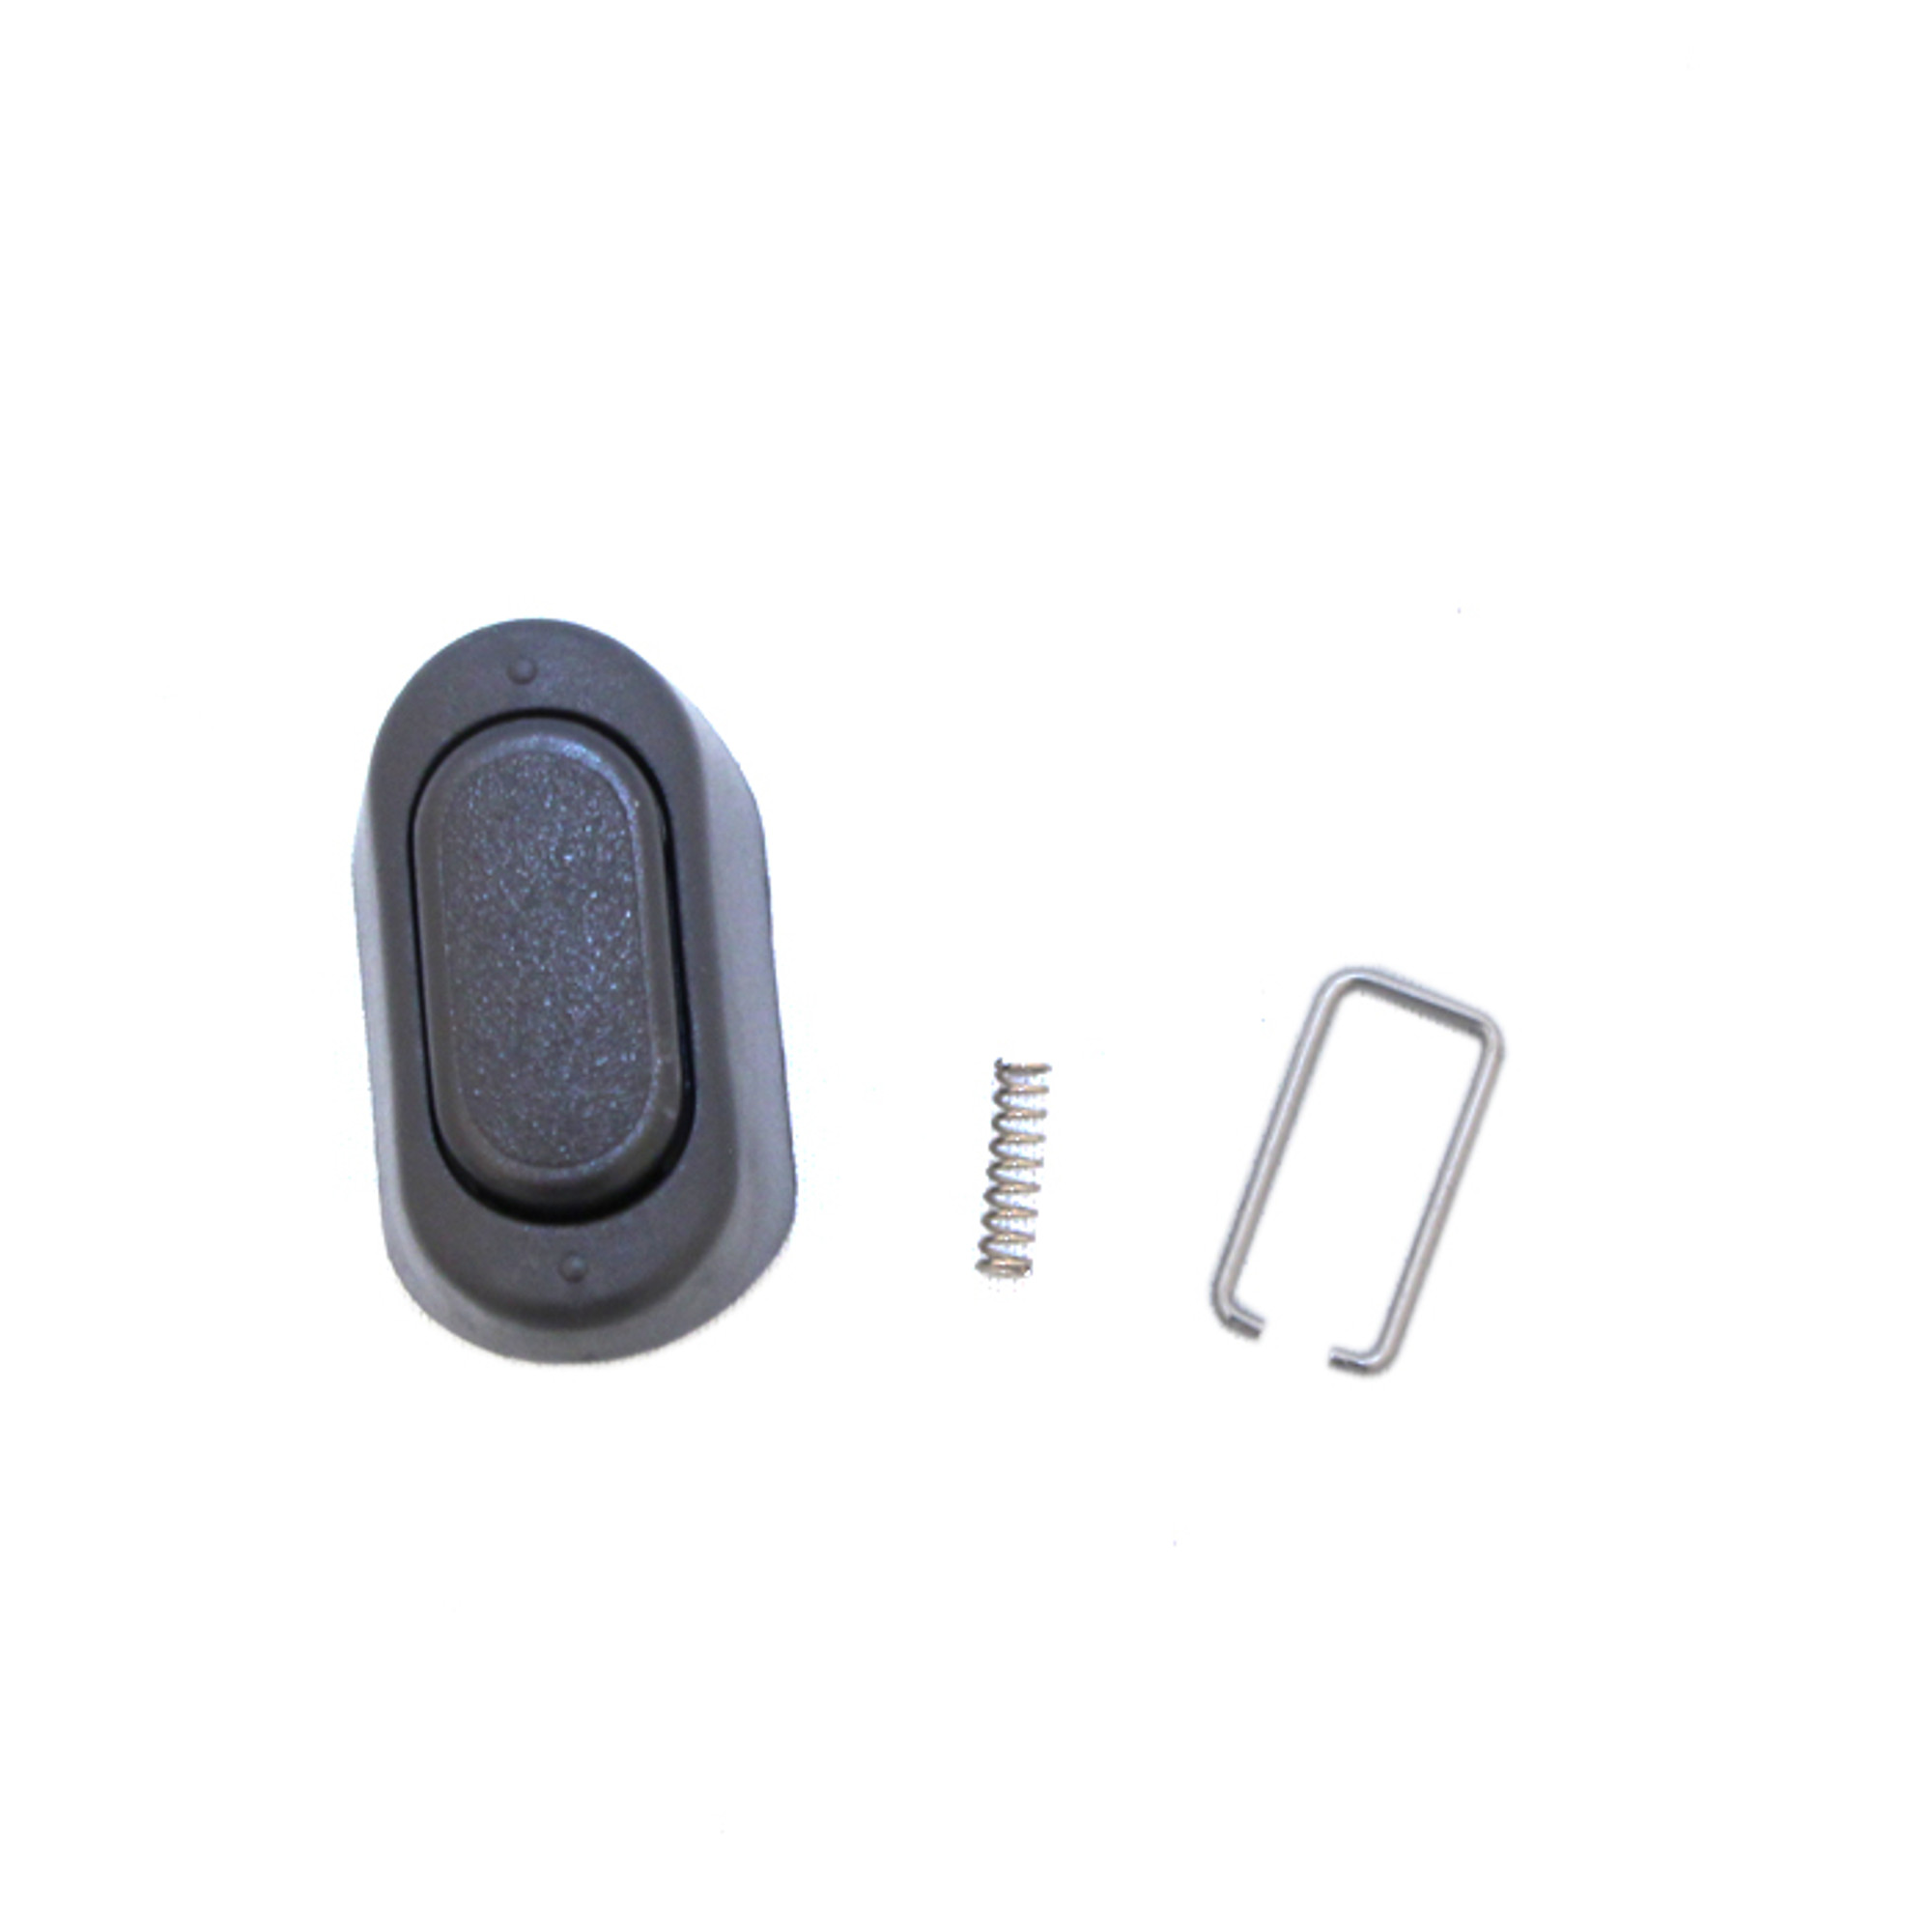 Miele Wand Button Repair Kit - All About Vacuums